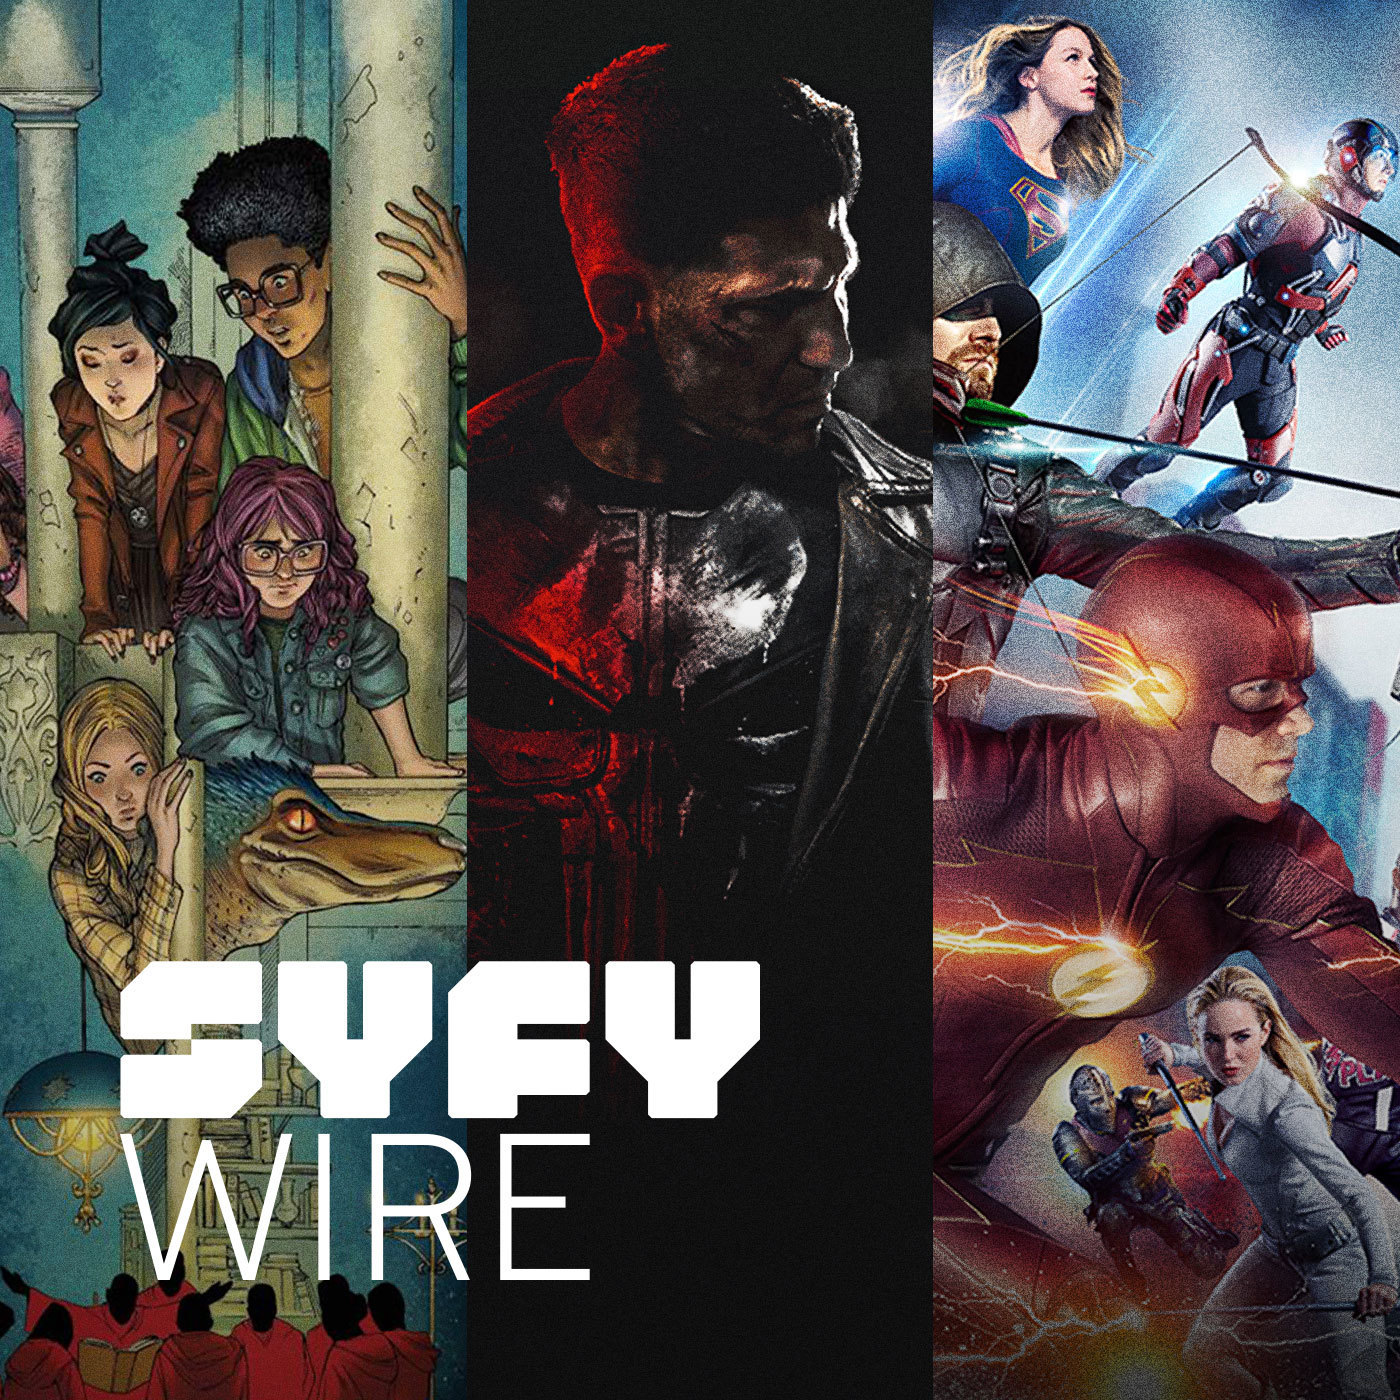 Marvel's Runaways, Marvel's The Punisher, CW Arrowverse crossover